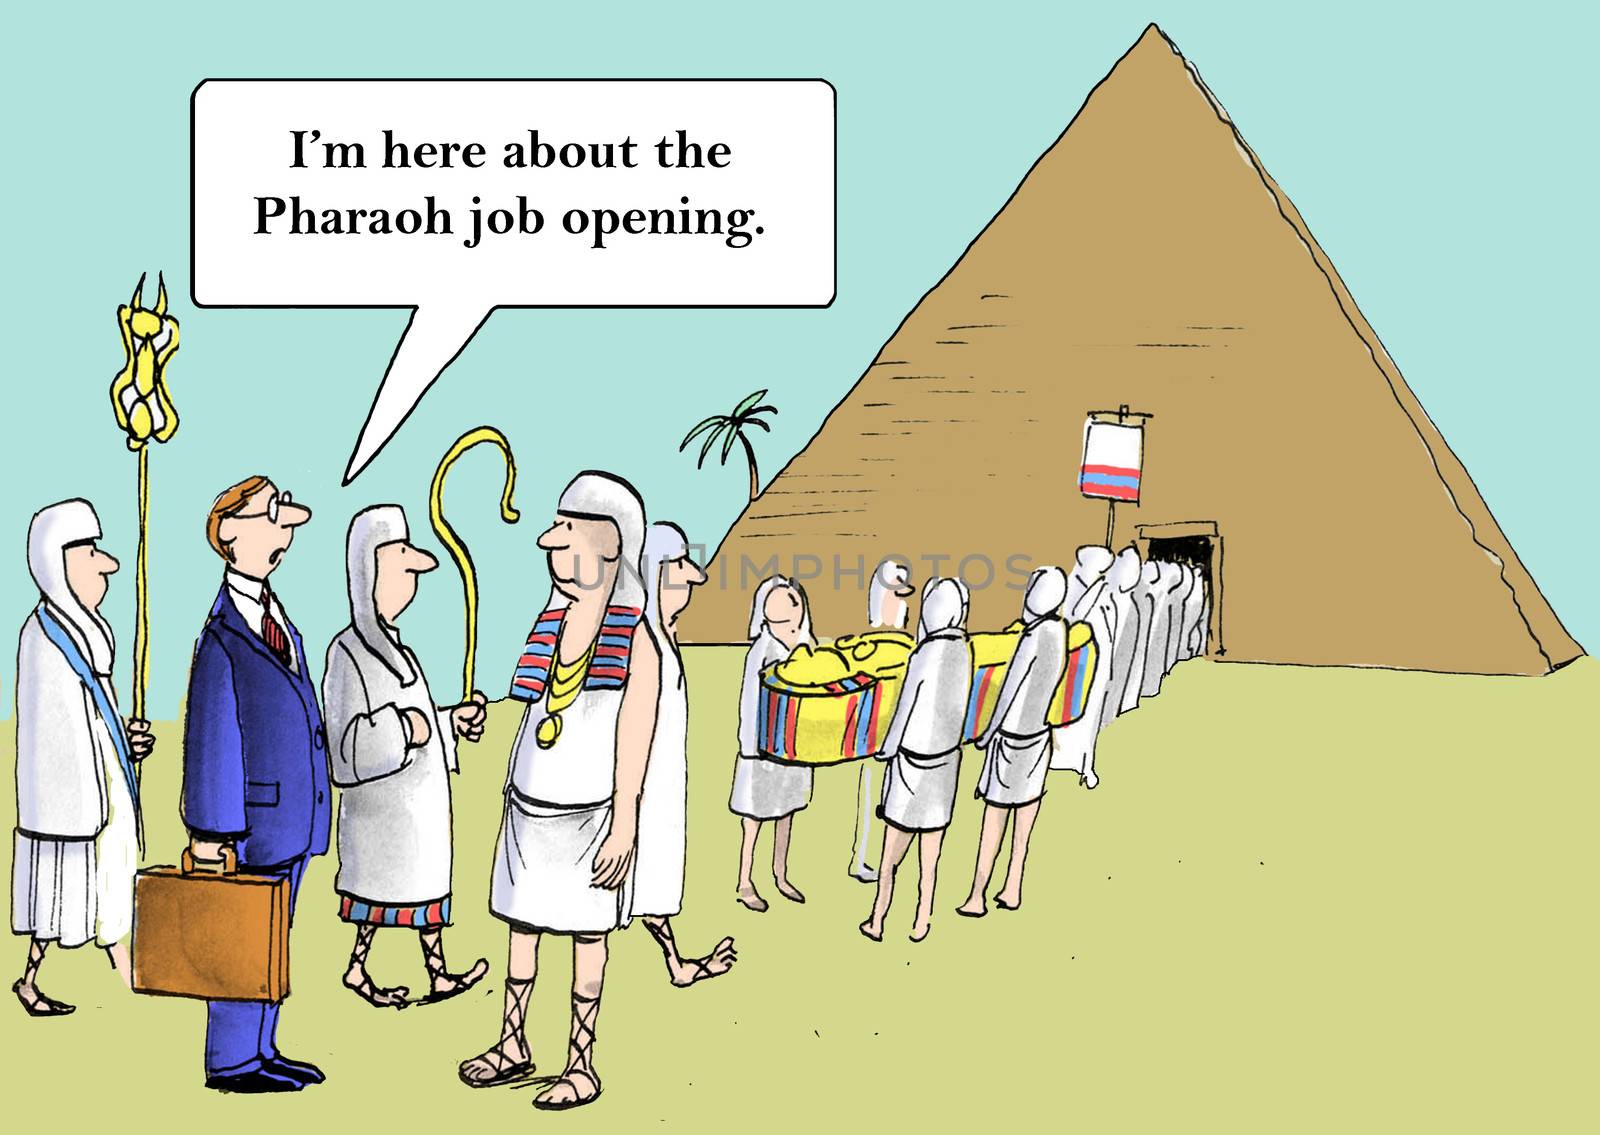 "I'm here about the Pharaoh job opening."